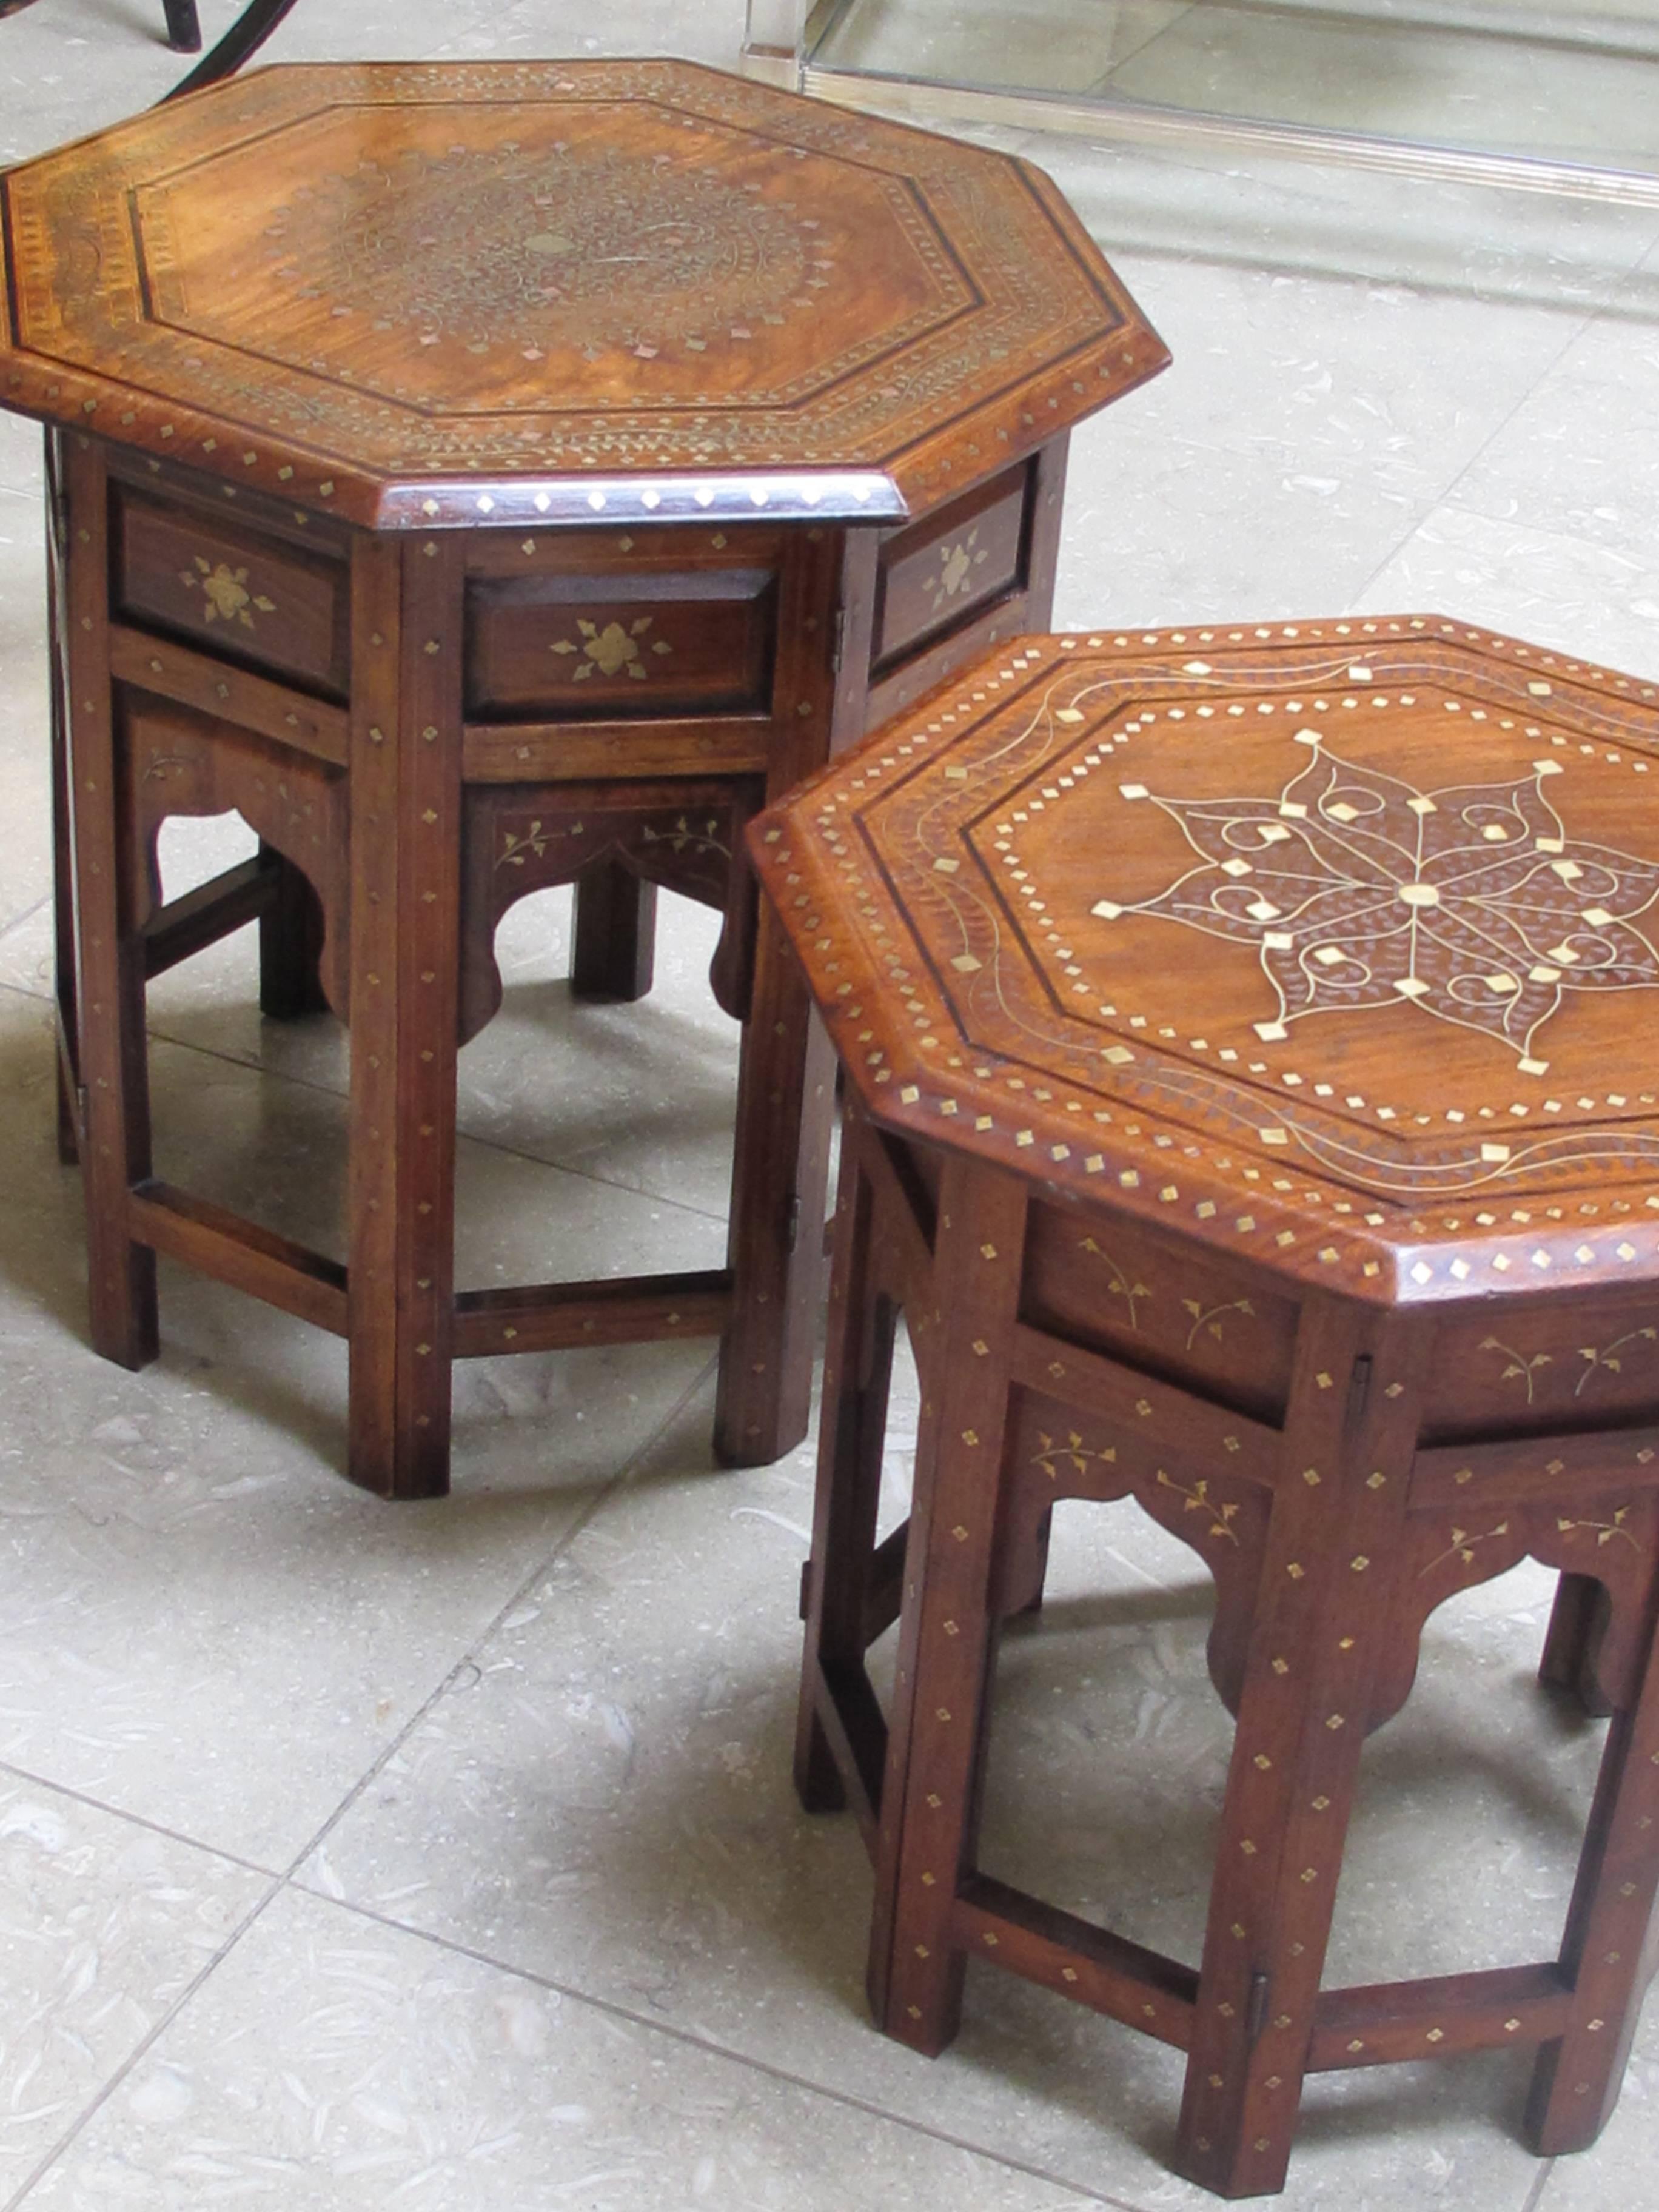 Intricately Designed Anglo-Indian Brass and Copper Octagonal Traveling Table 1